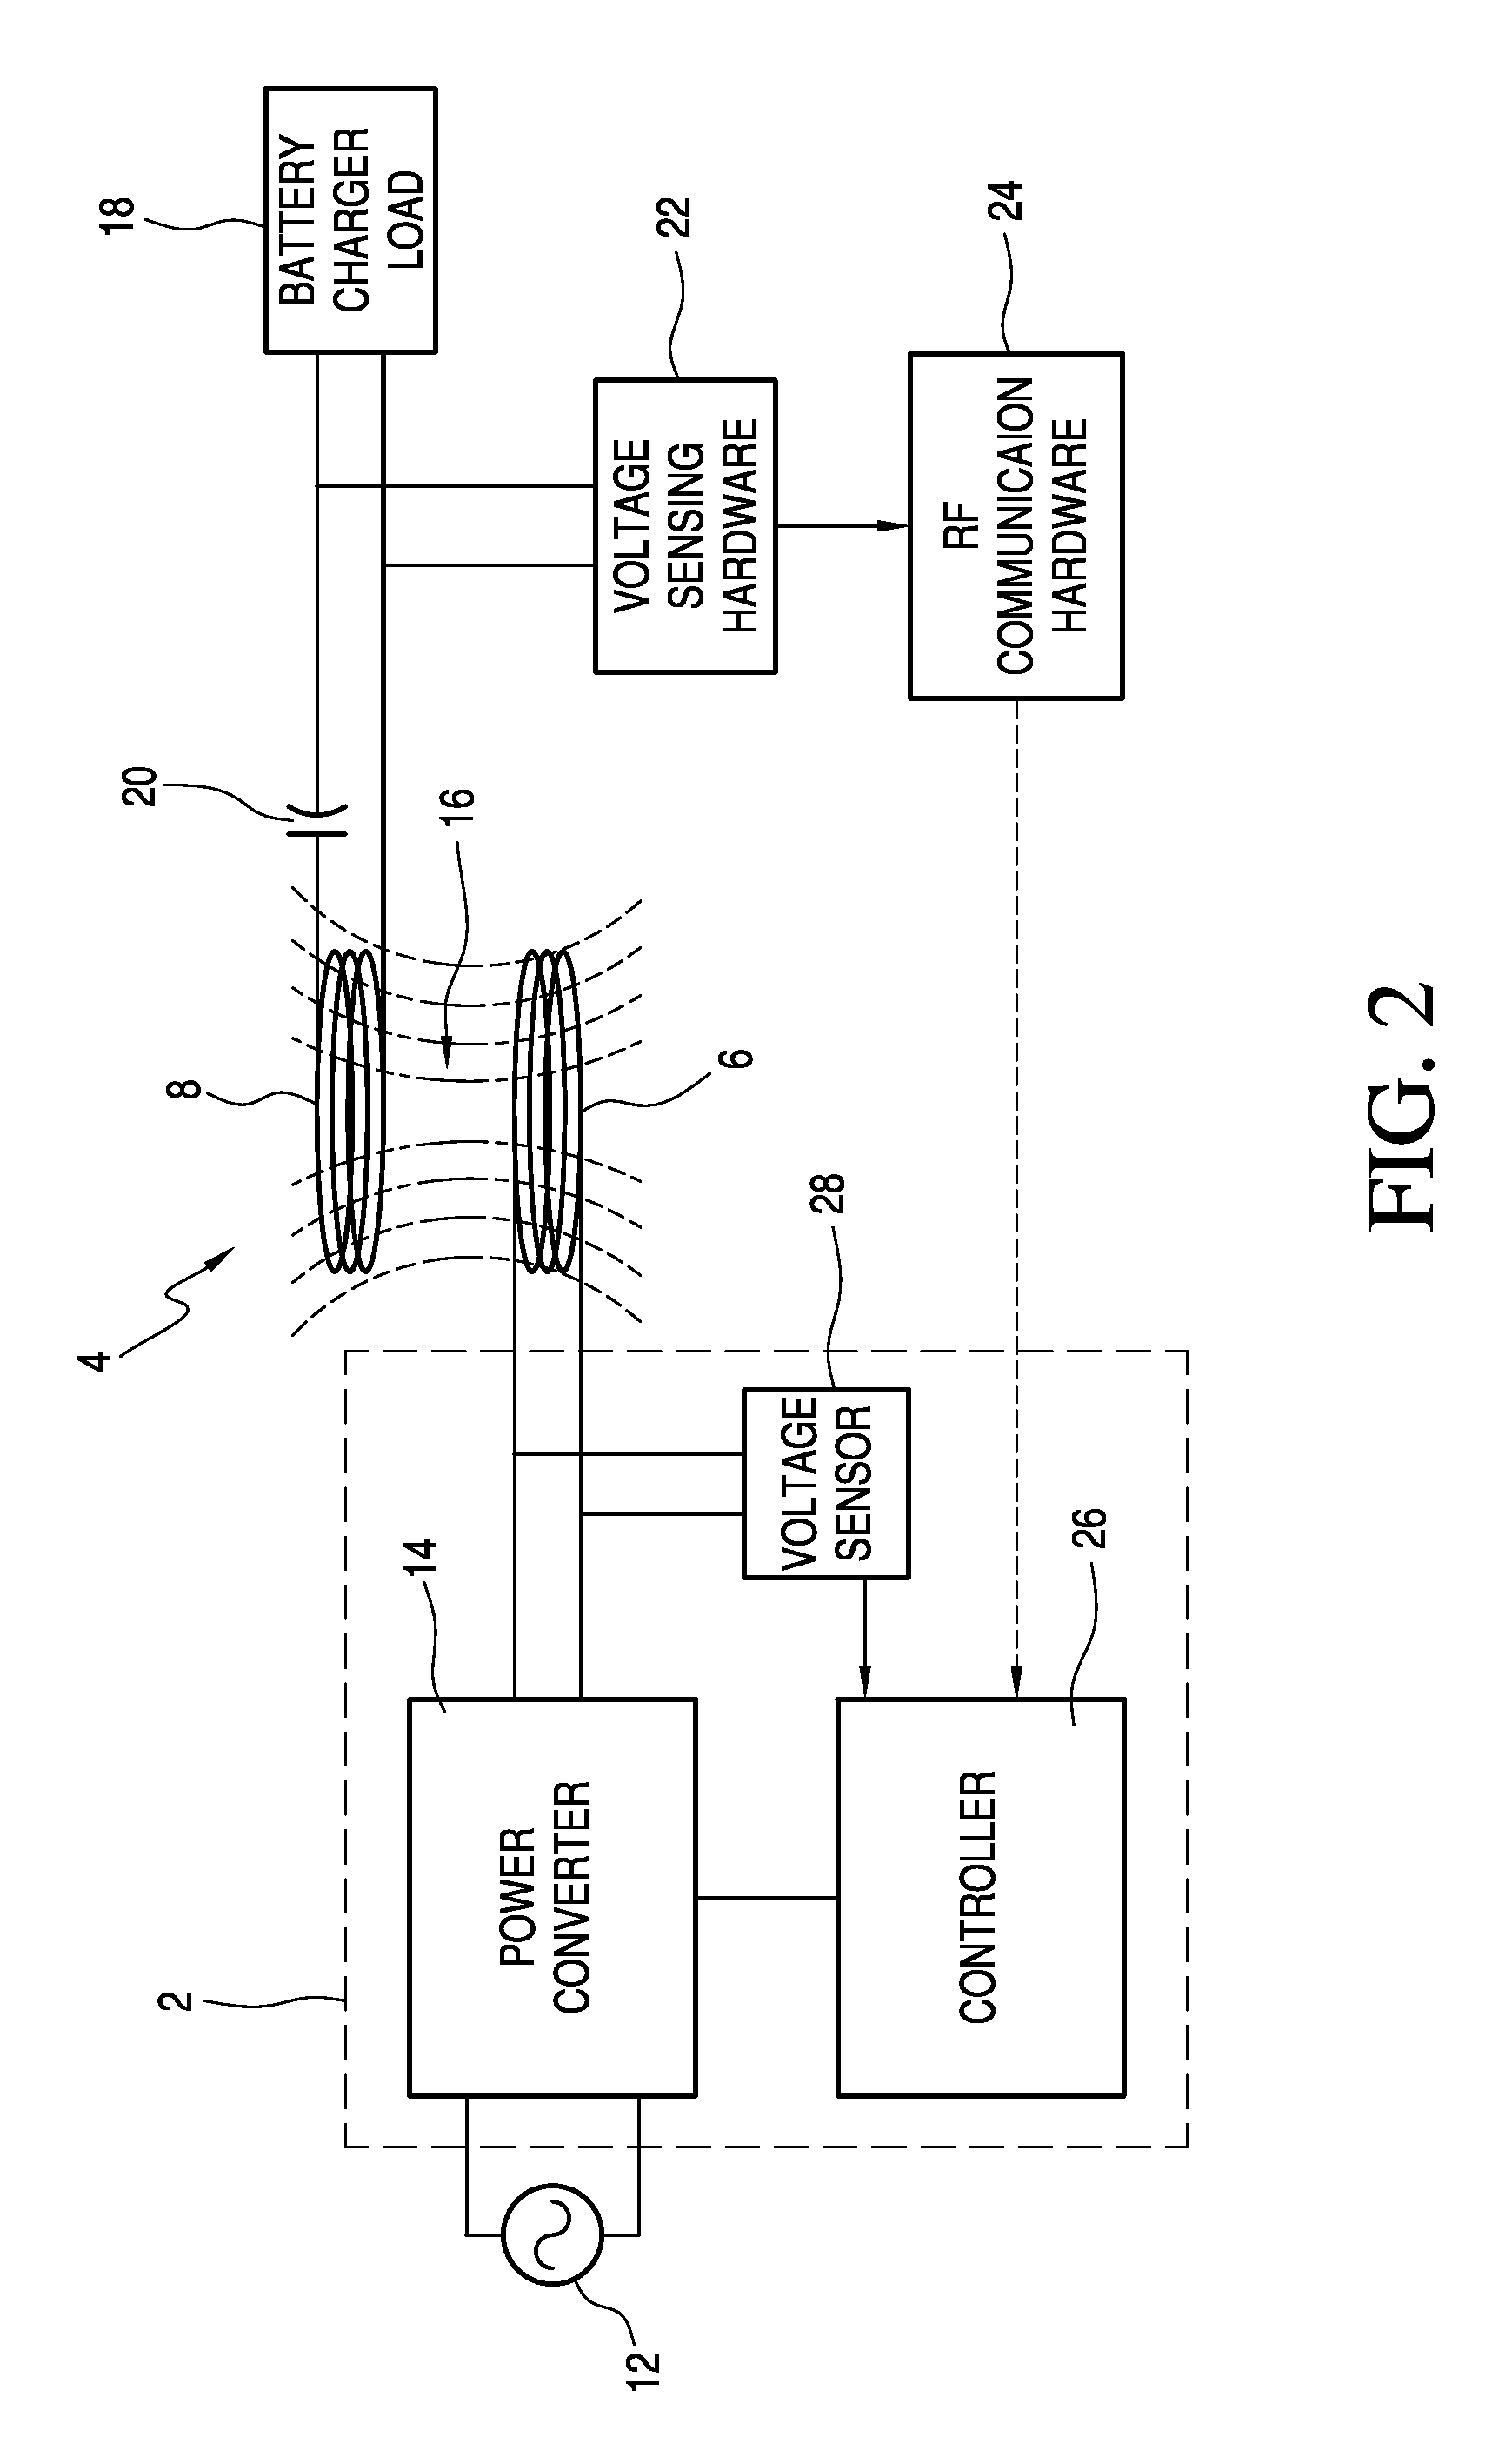 Method and apparatus for inductively transferring ac power between a charging unit and a vehicle